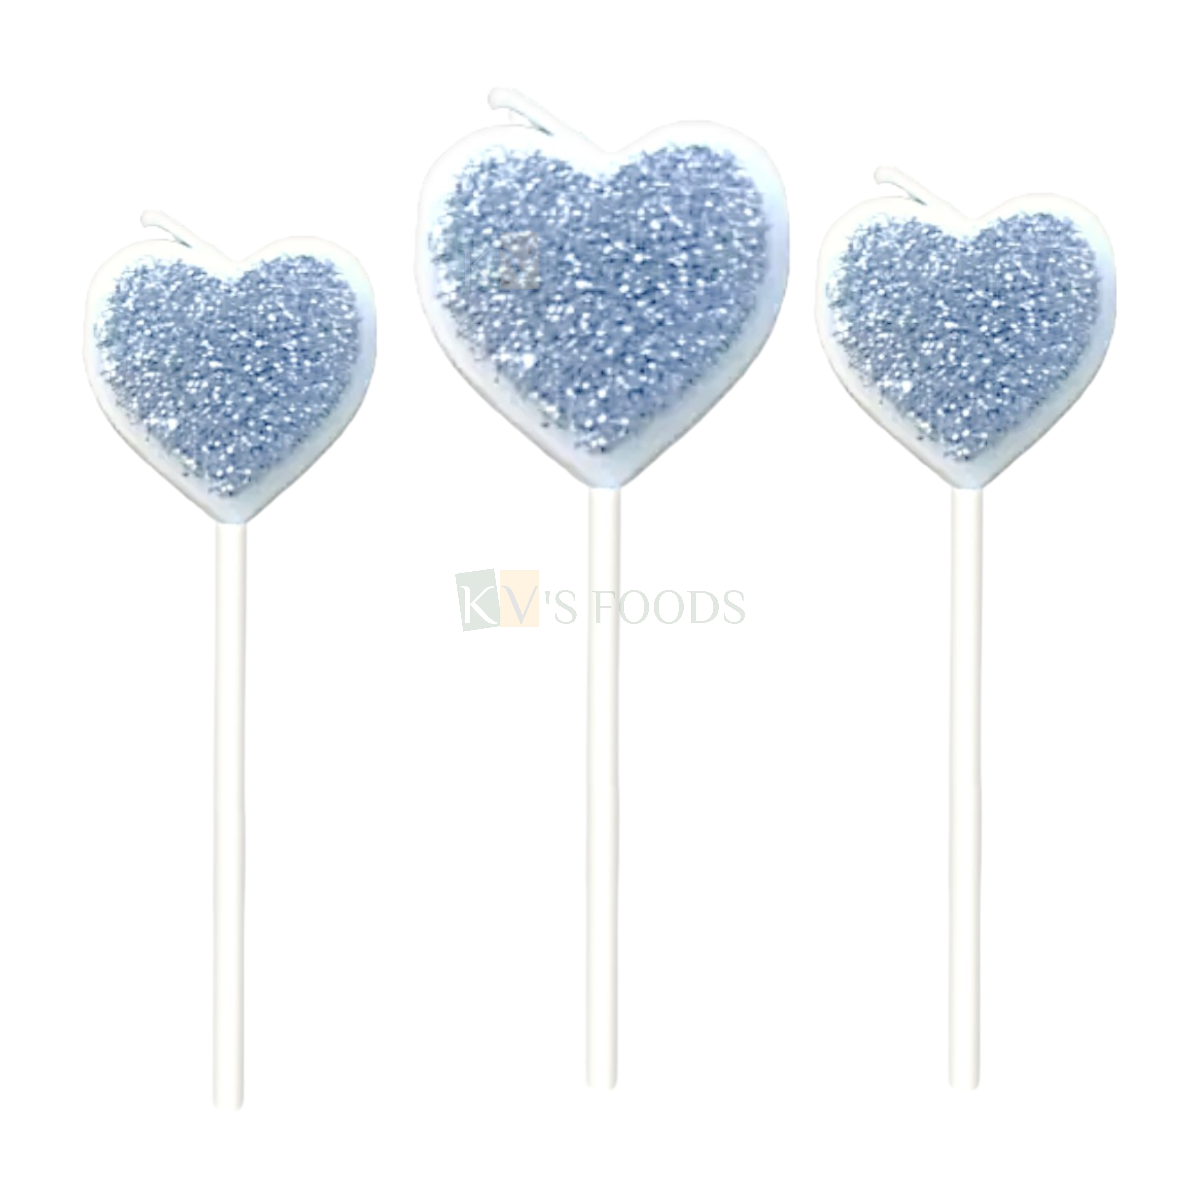 3 PCS Silver White Colour Shiny Glittery Heart Shape Wax Candles Cake and Cupcake Inserts Wedding Anniversary Love Valentine's Cakes Decorations Happy Birthday Theme Candle DIY Cake Decoration